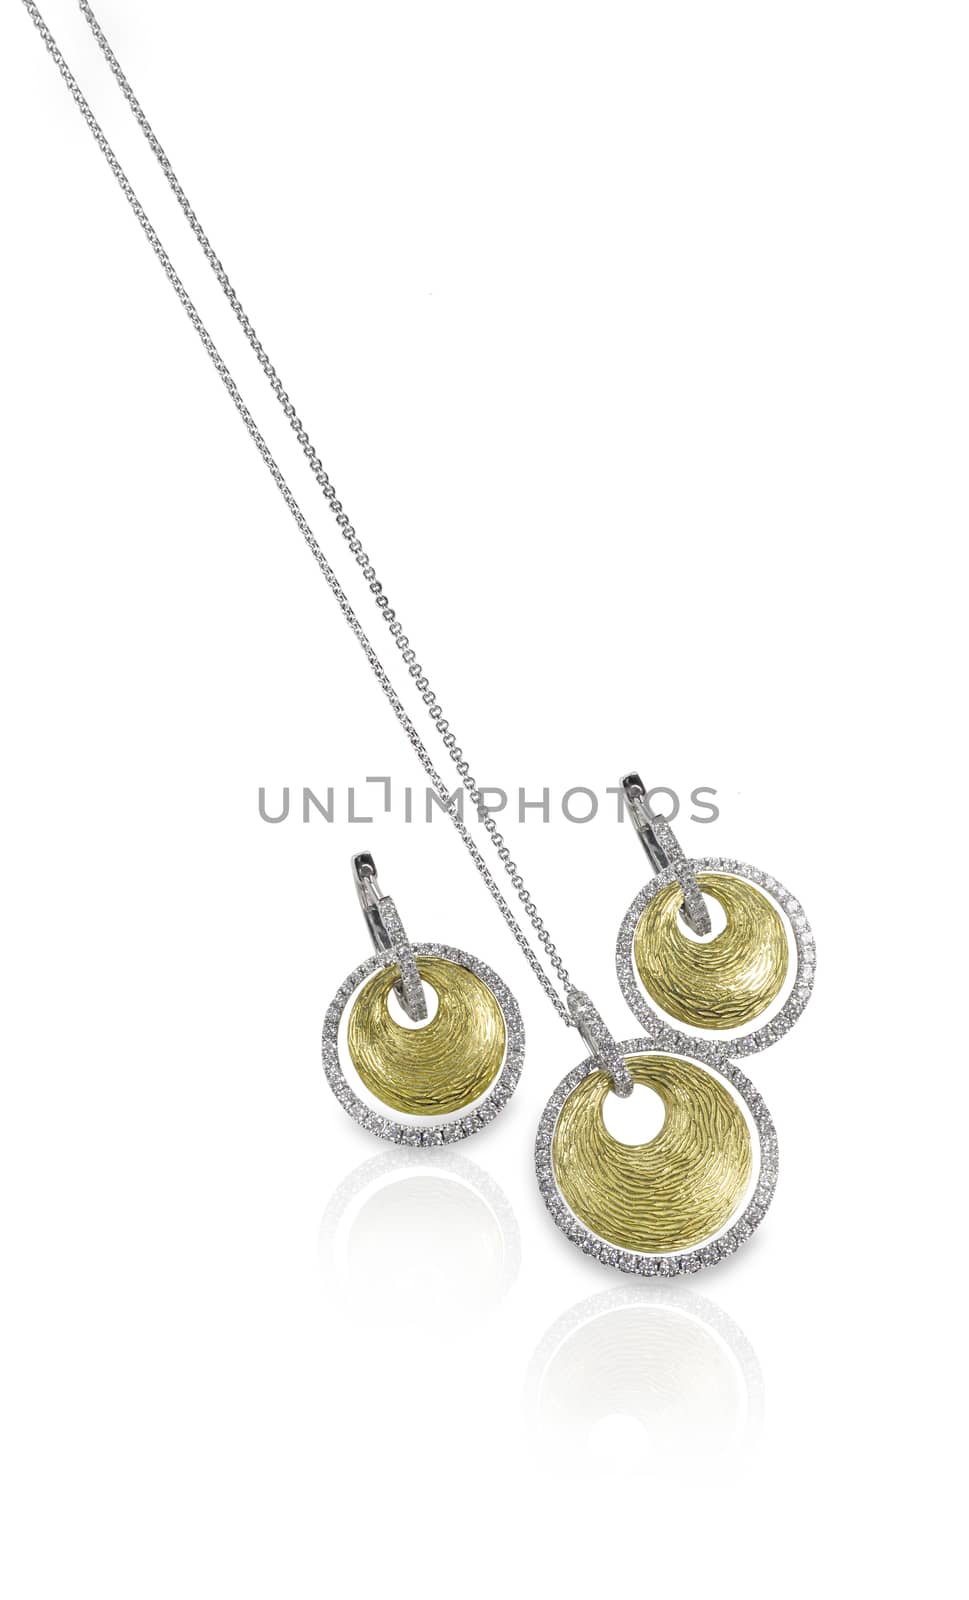 Diamond white and yellow gold fashion necklace and earring set isolated on white with a reflection